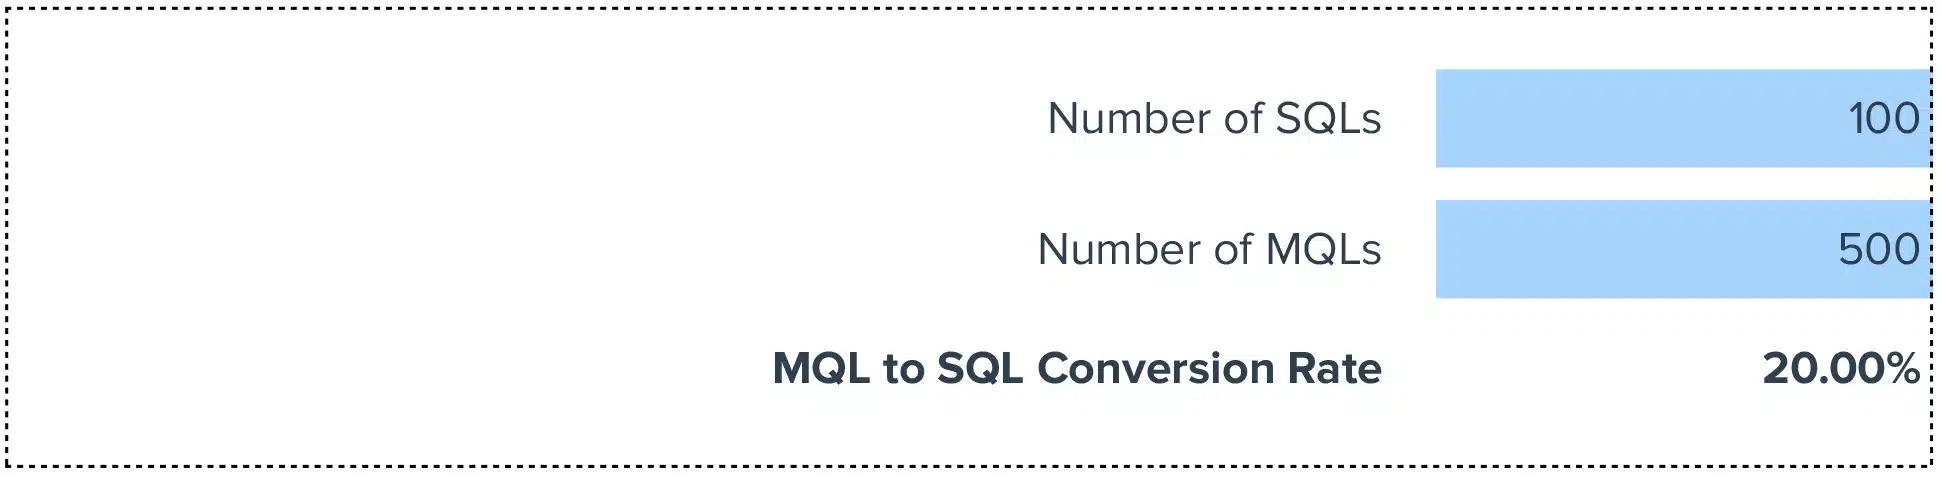 MQL to SQL Conversion Rate